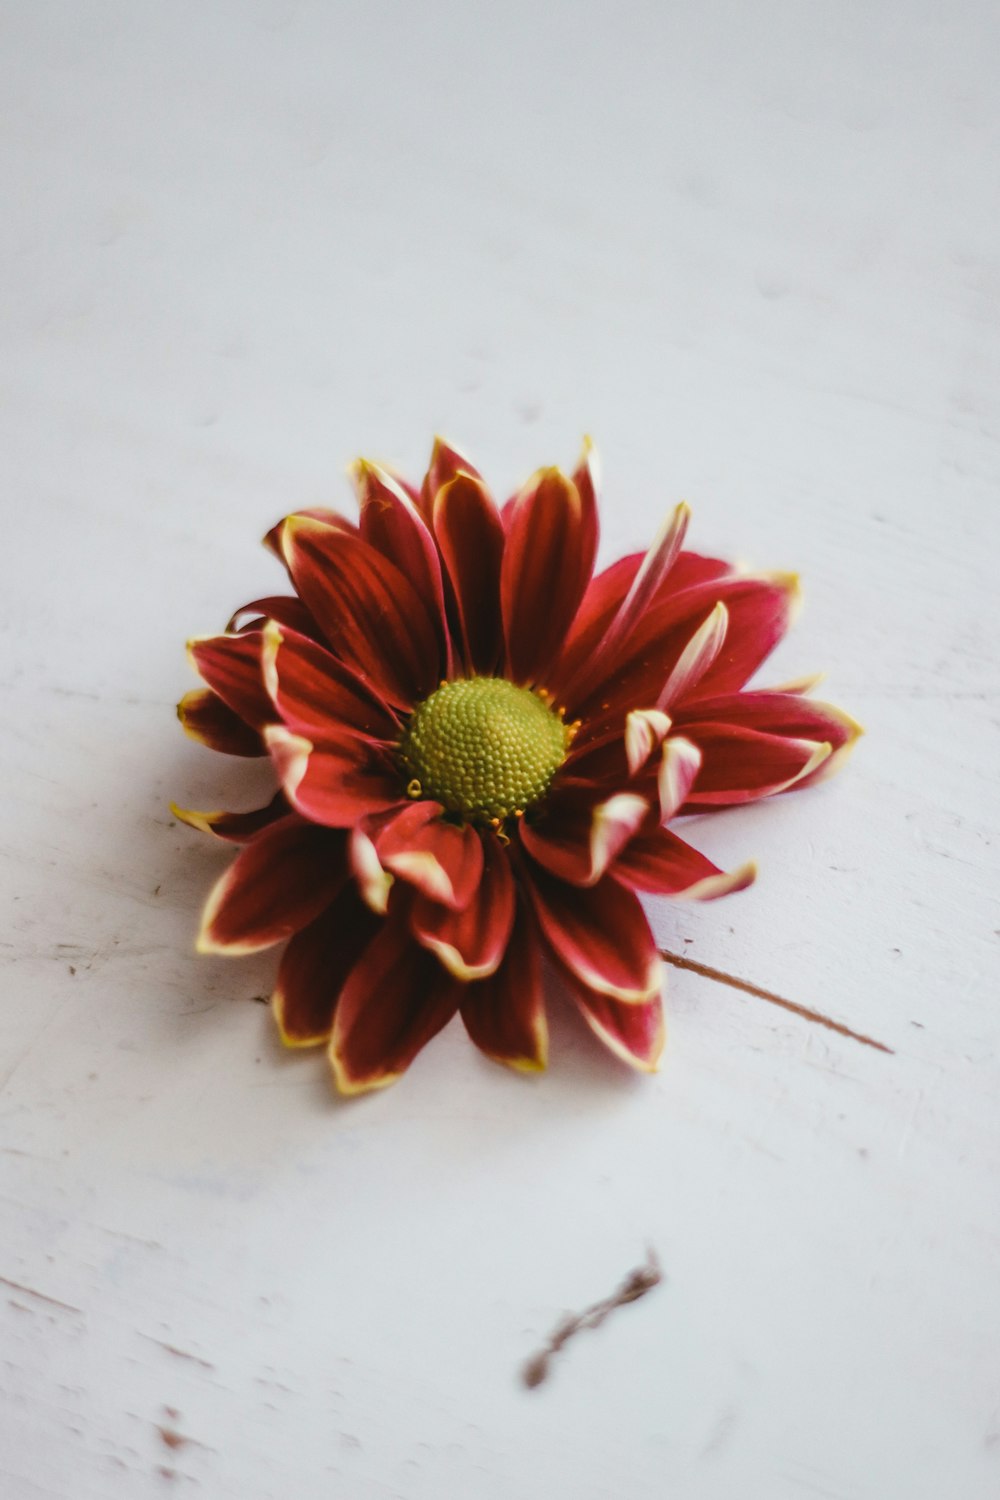 red and yellow flower on white surface